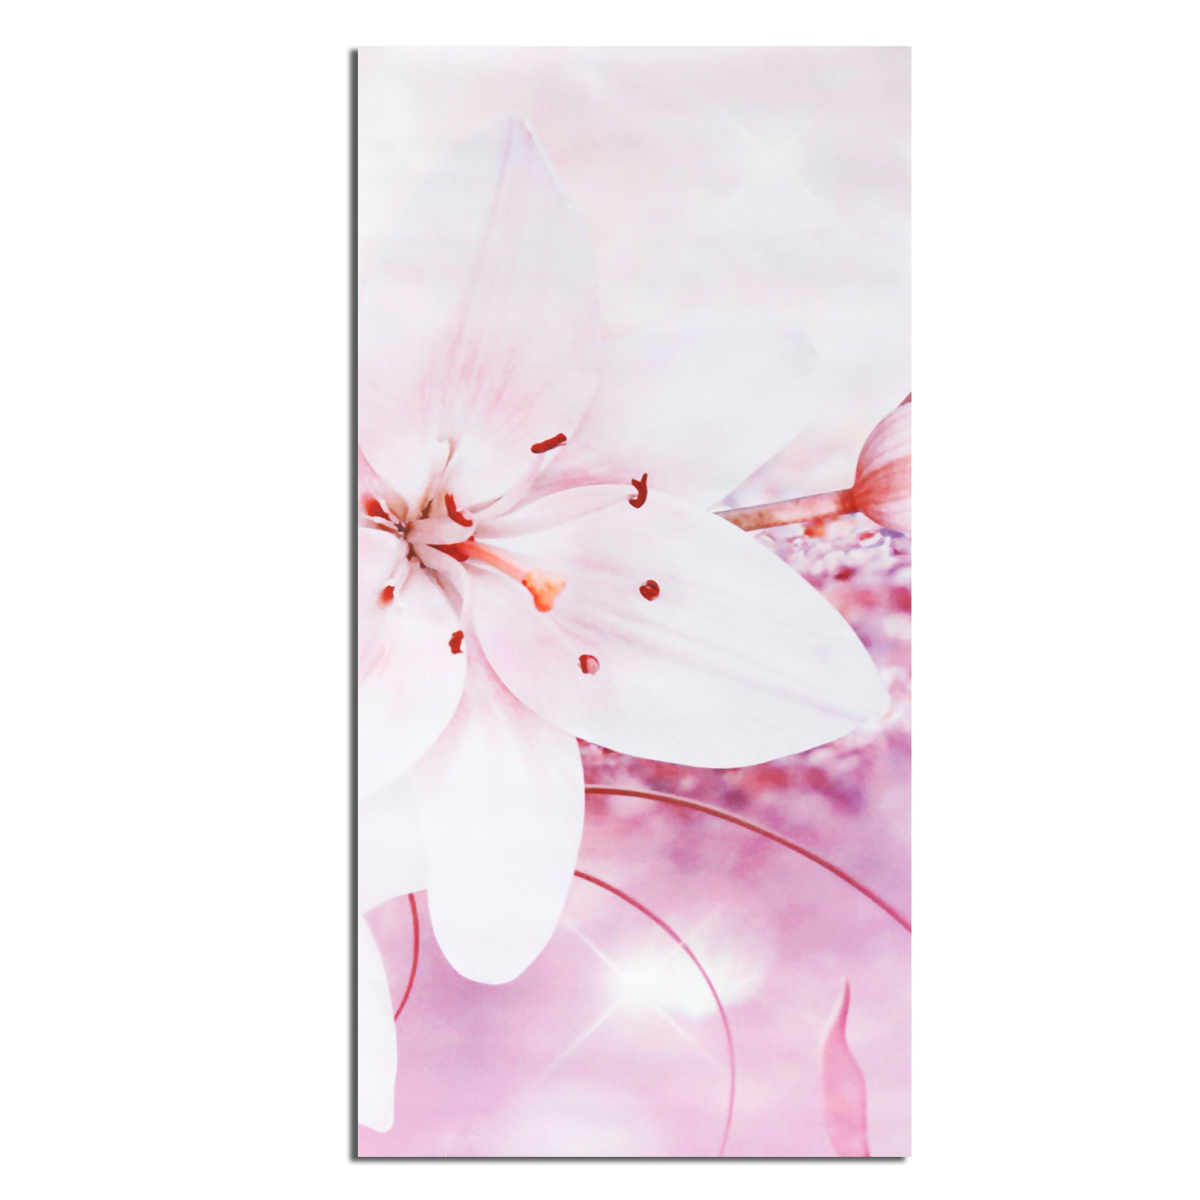 5PCS-Frameless-Canvas-Paintings-Lilies-Art-Paint-for-Home-Wall-Decoration-1080757-2